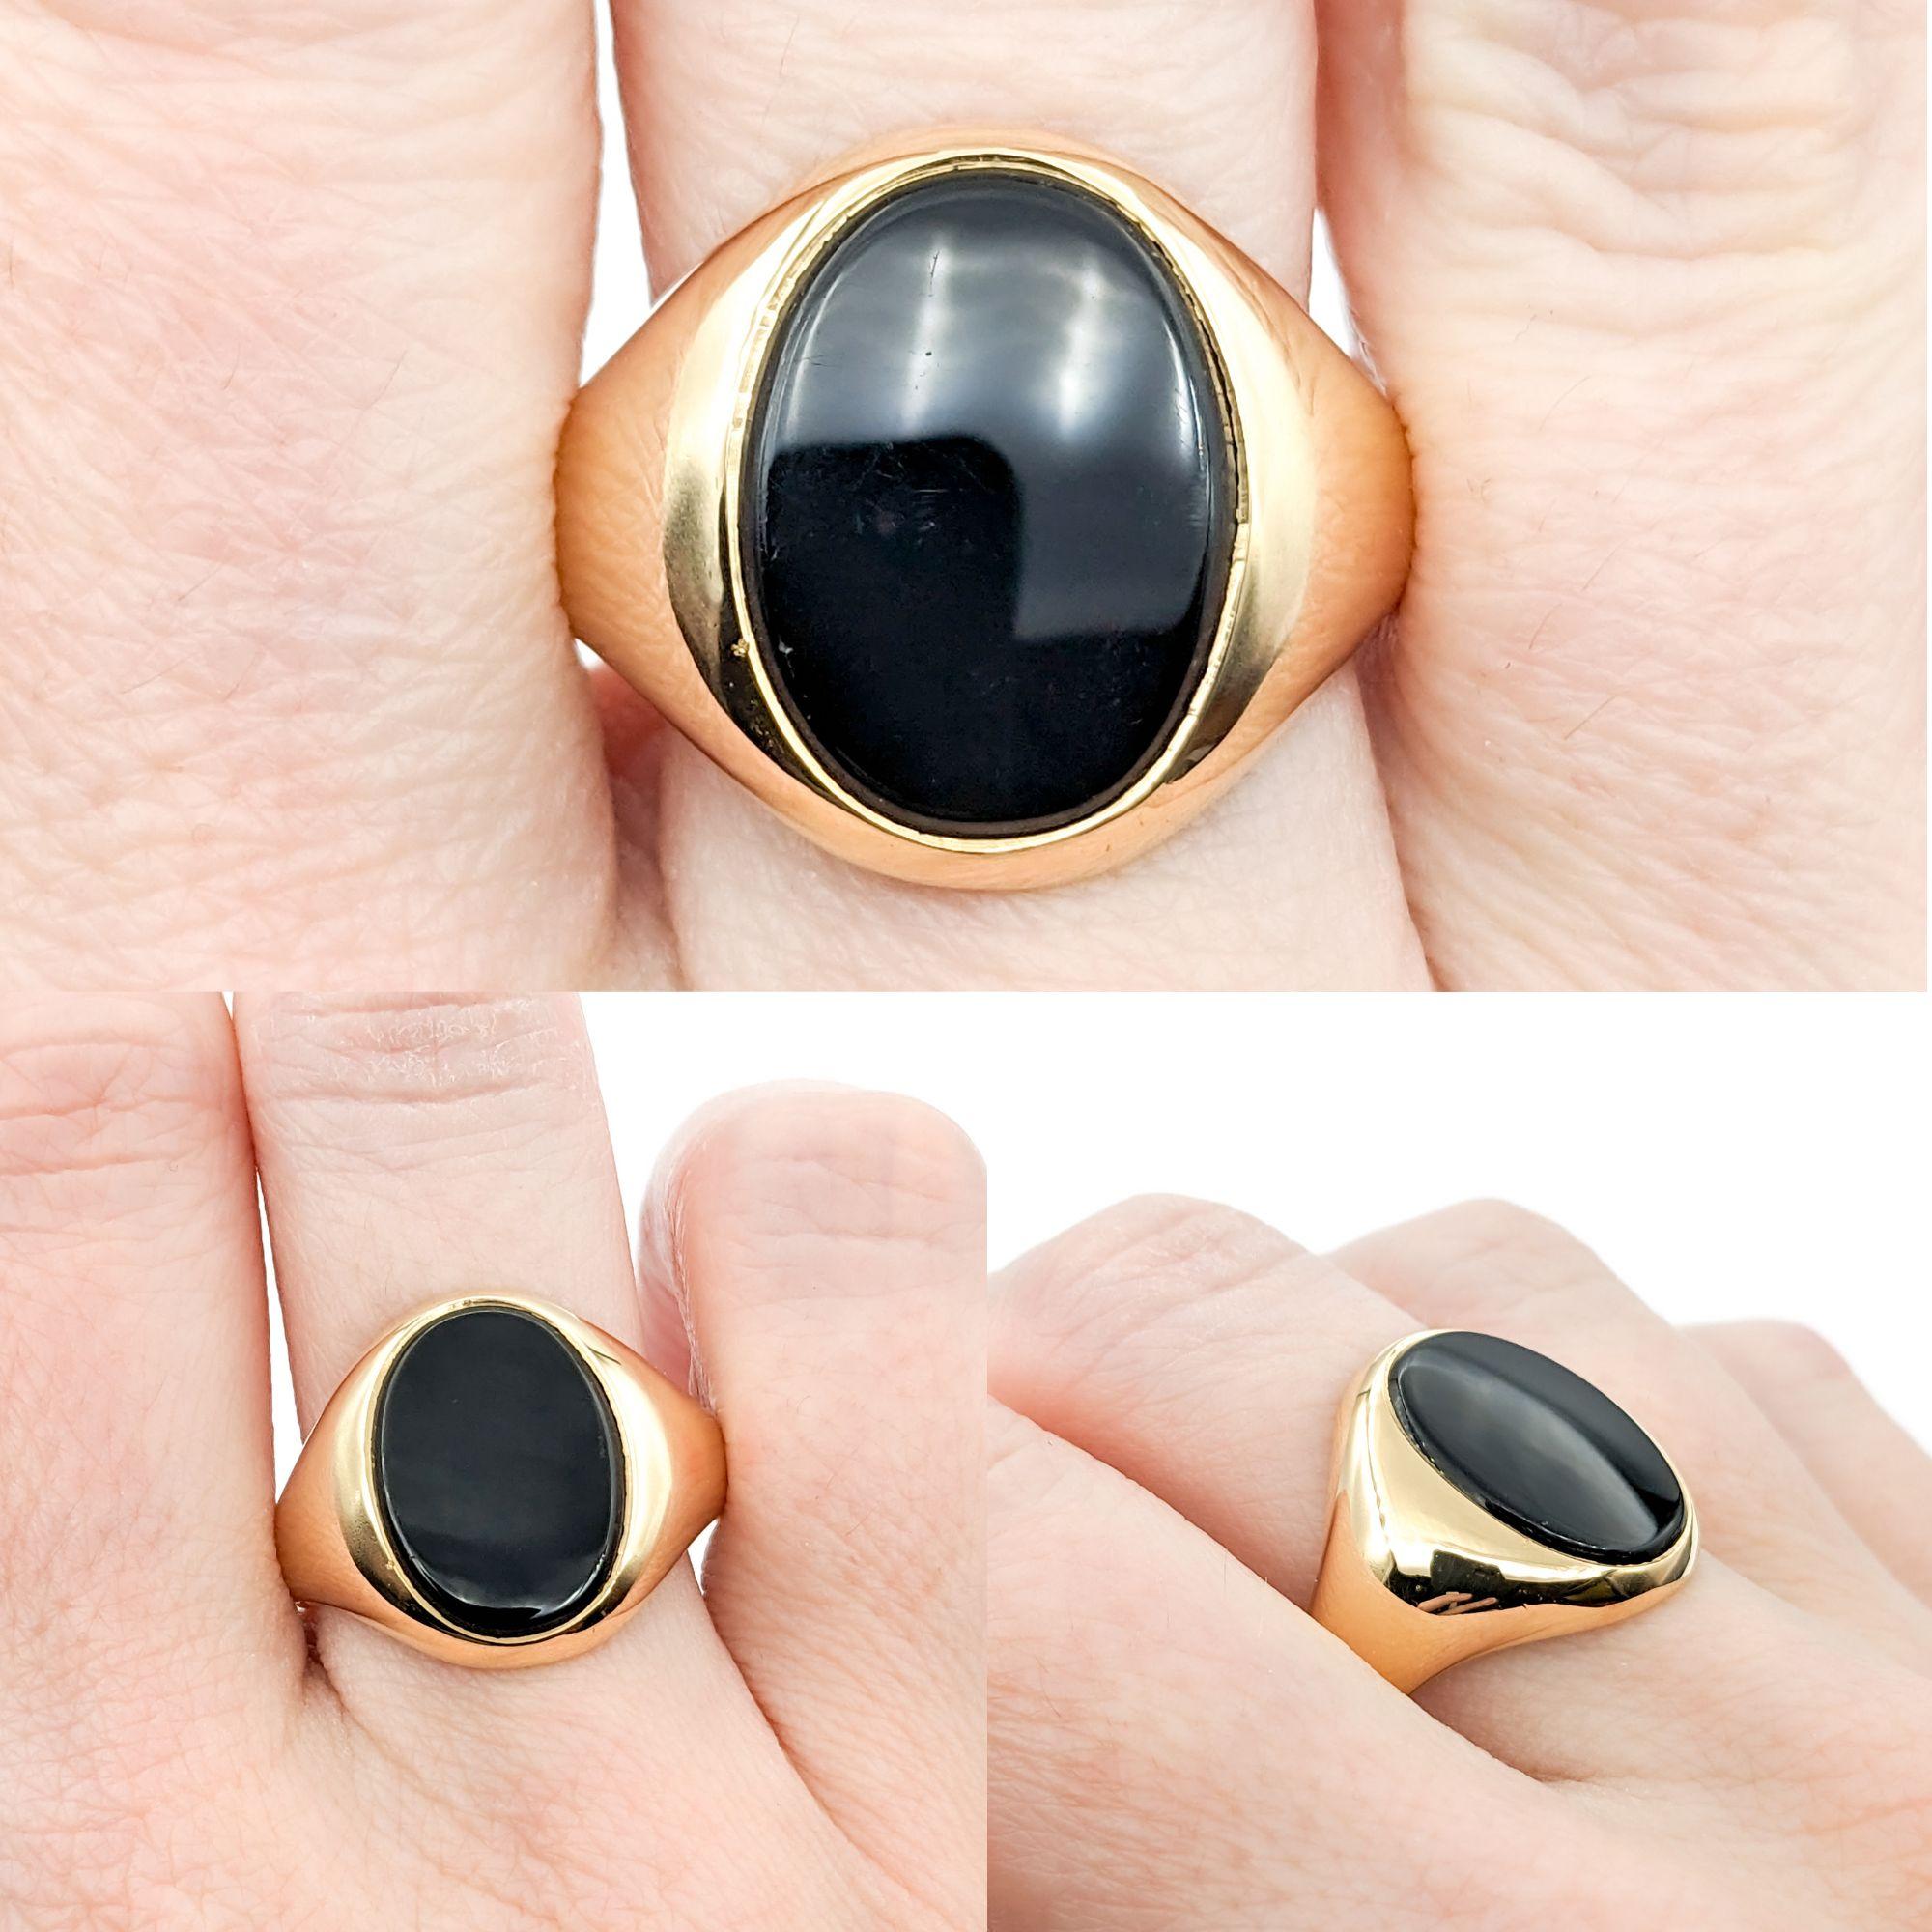 Onyx Ring In yellow Gold

This sophisticated men's gemstone fashion ring is skillfully crafted in 14kt yellow gold. It showcases a prominent 16x12mm oval Onyx centerpiece, offering a sleek and bold statement. The striking Onyx is known for its deep